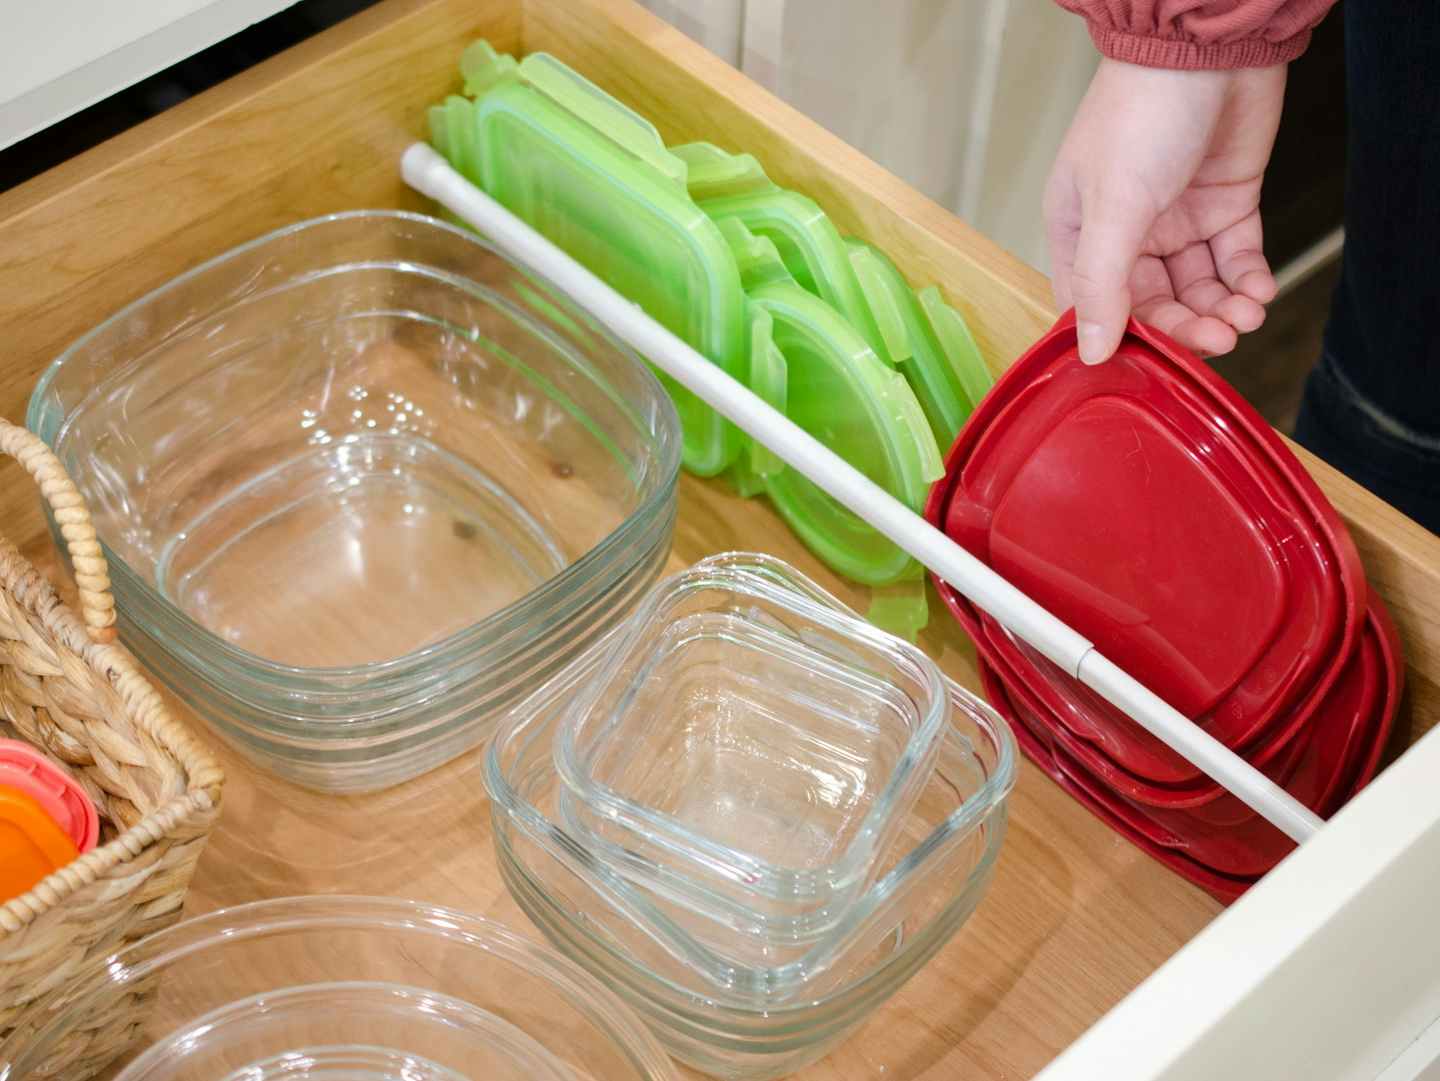 Keep plastic lids in place